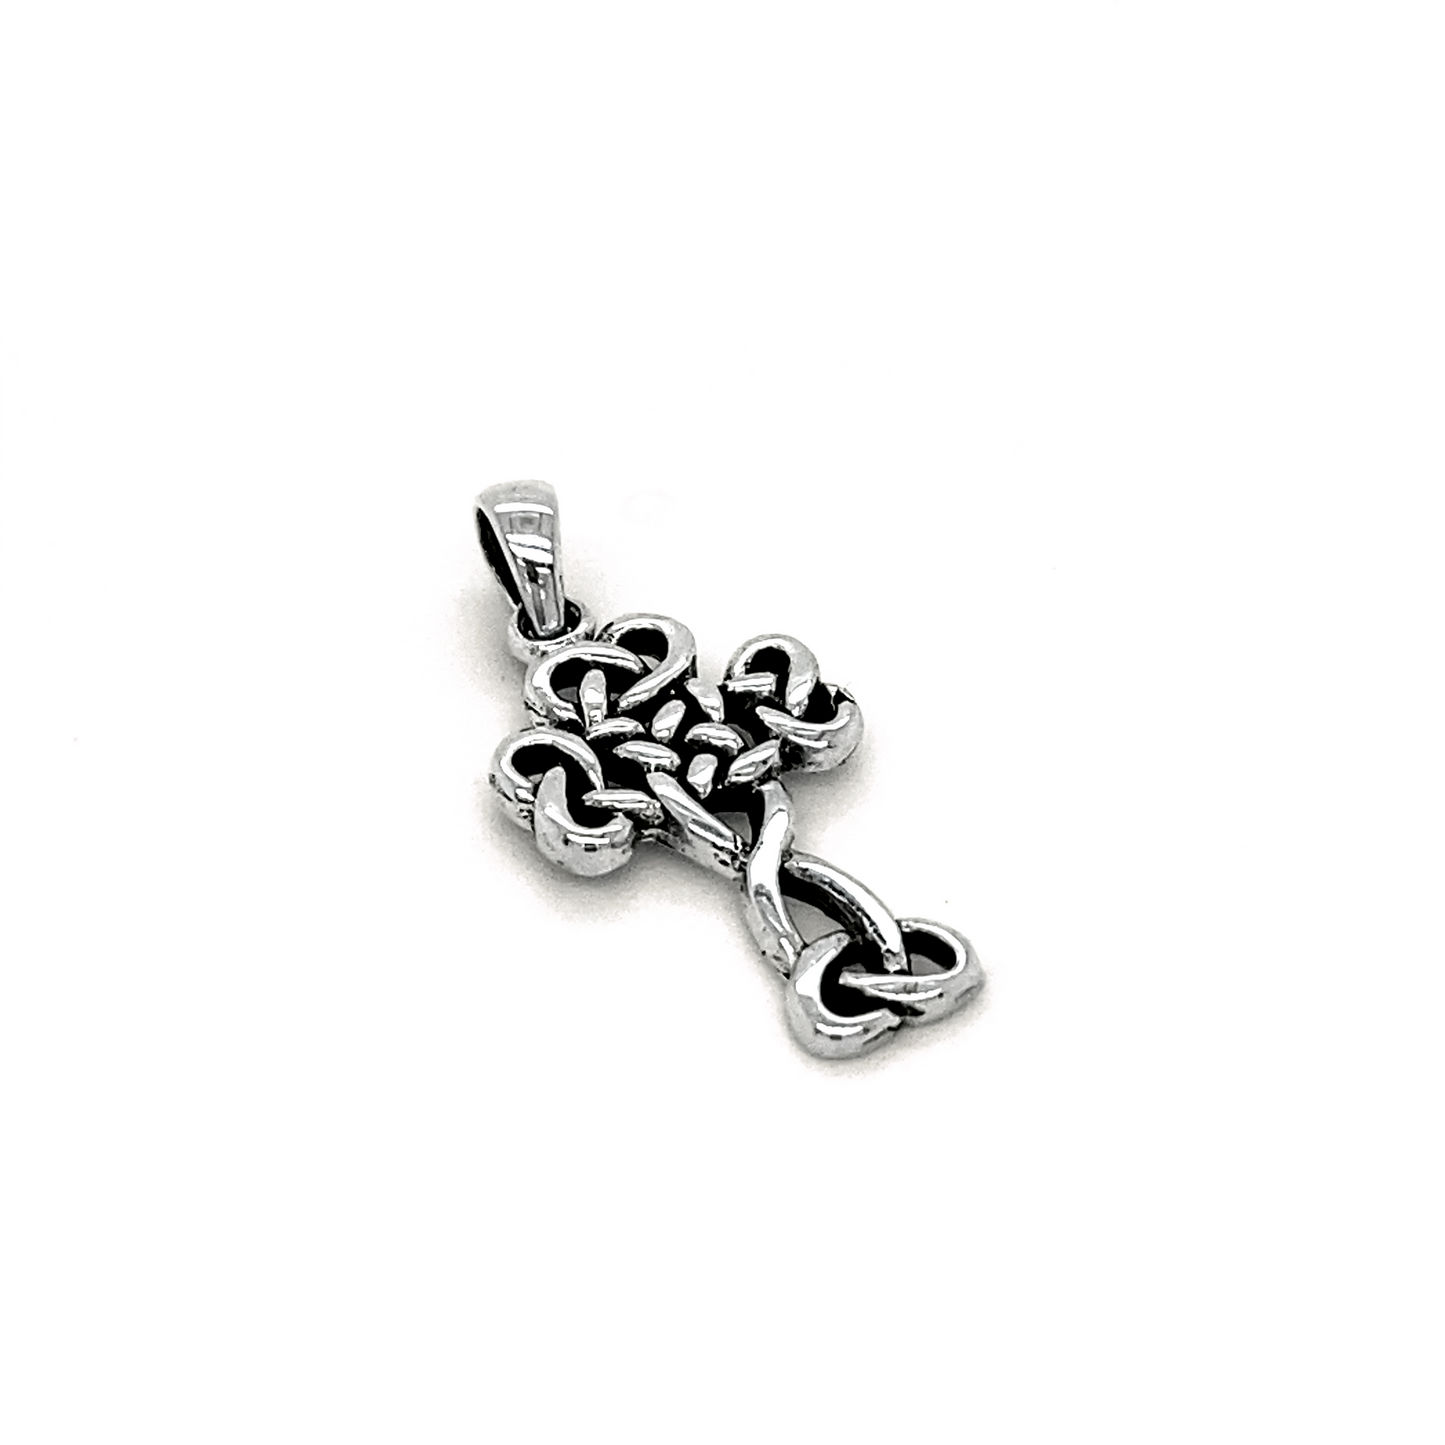 A dainty Celtic Knot Cross Pendant crafted from .925 sterling silver on a white background.